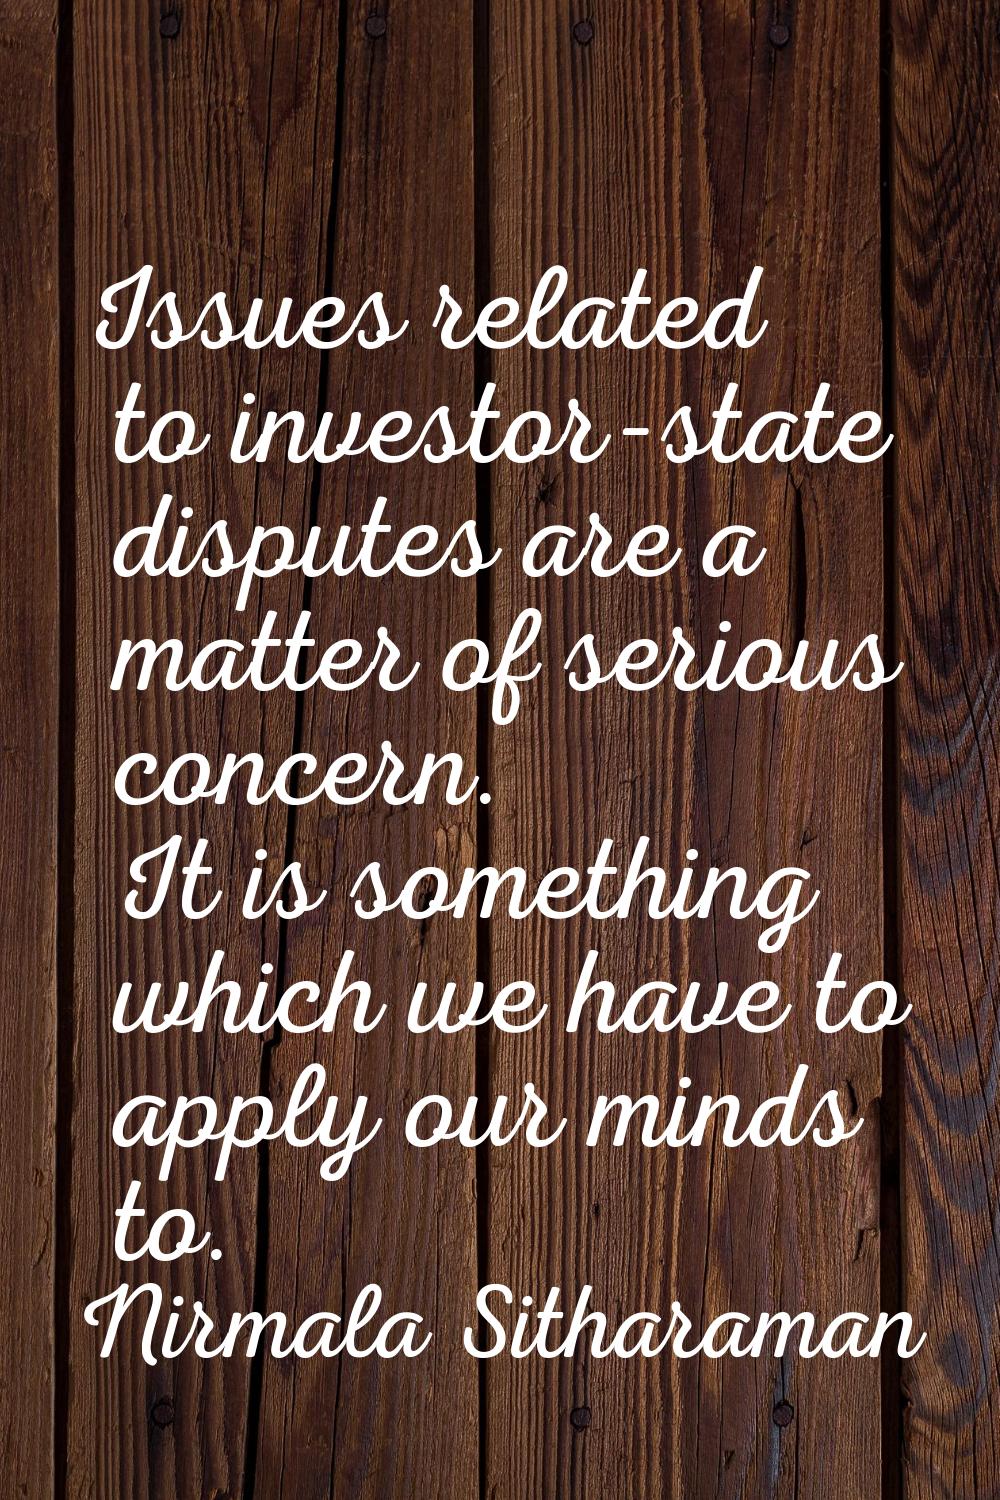 Issues related to investor-state disputes are a matter of serious concern. It is something which we